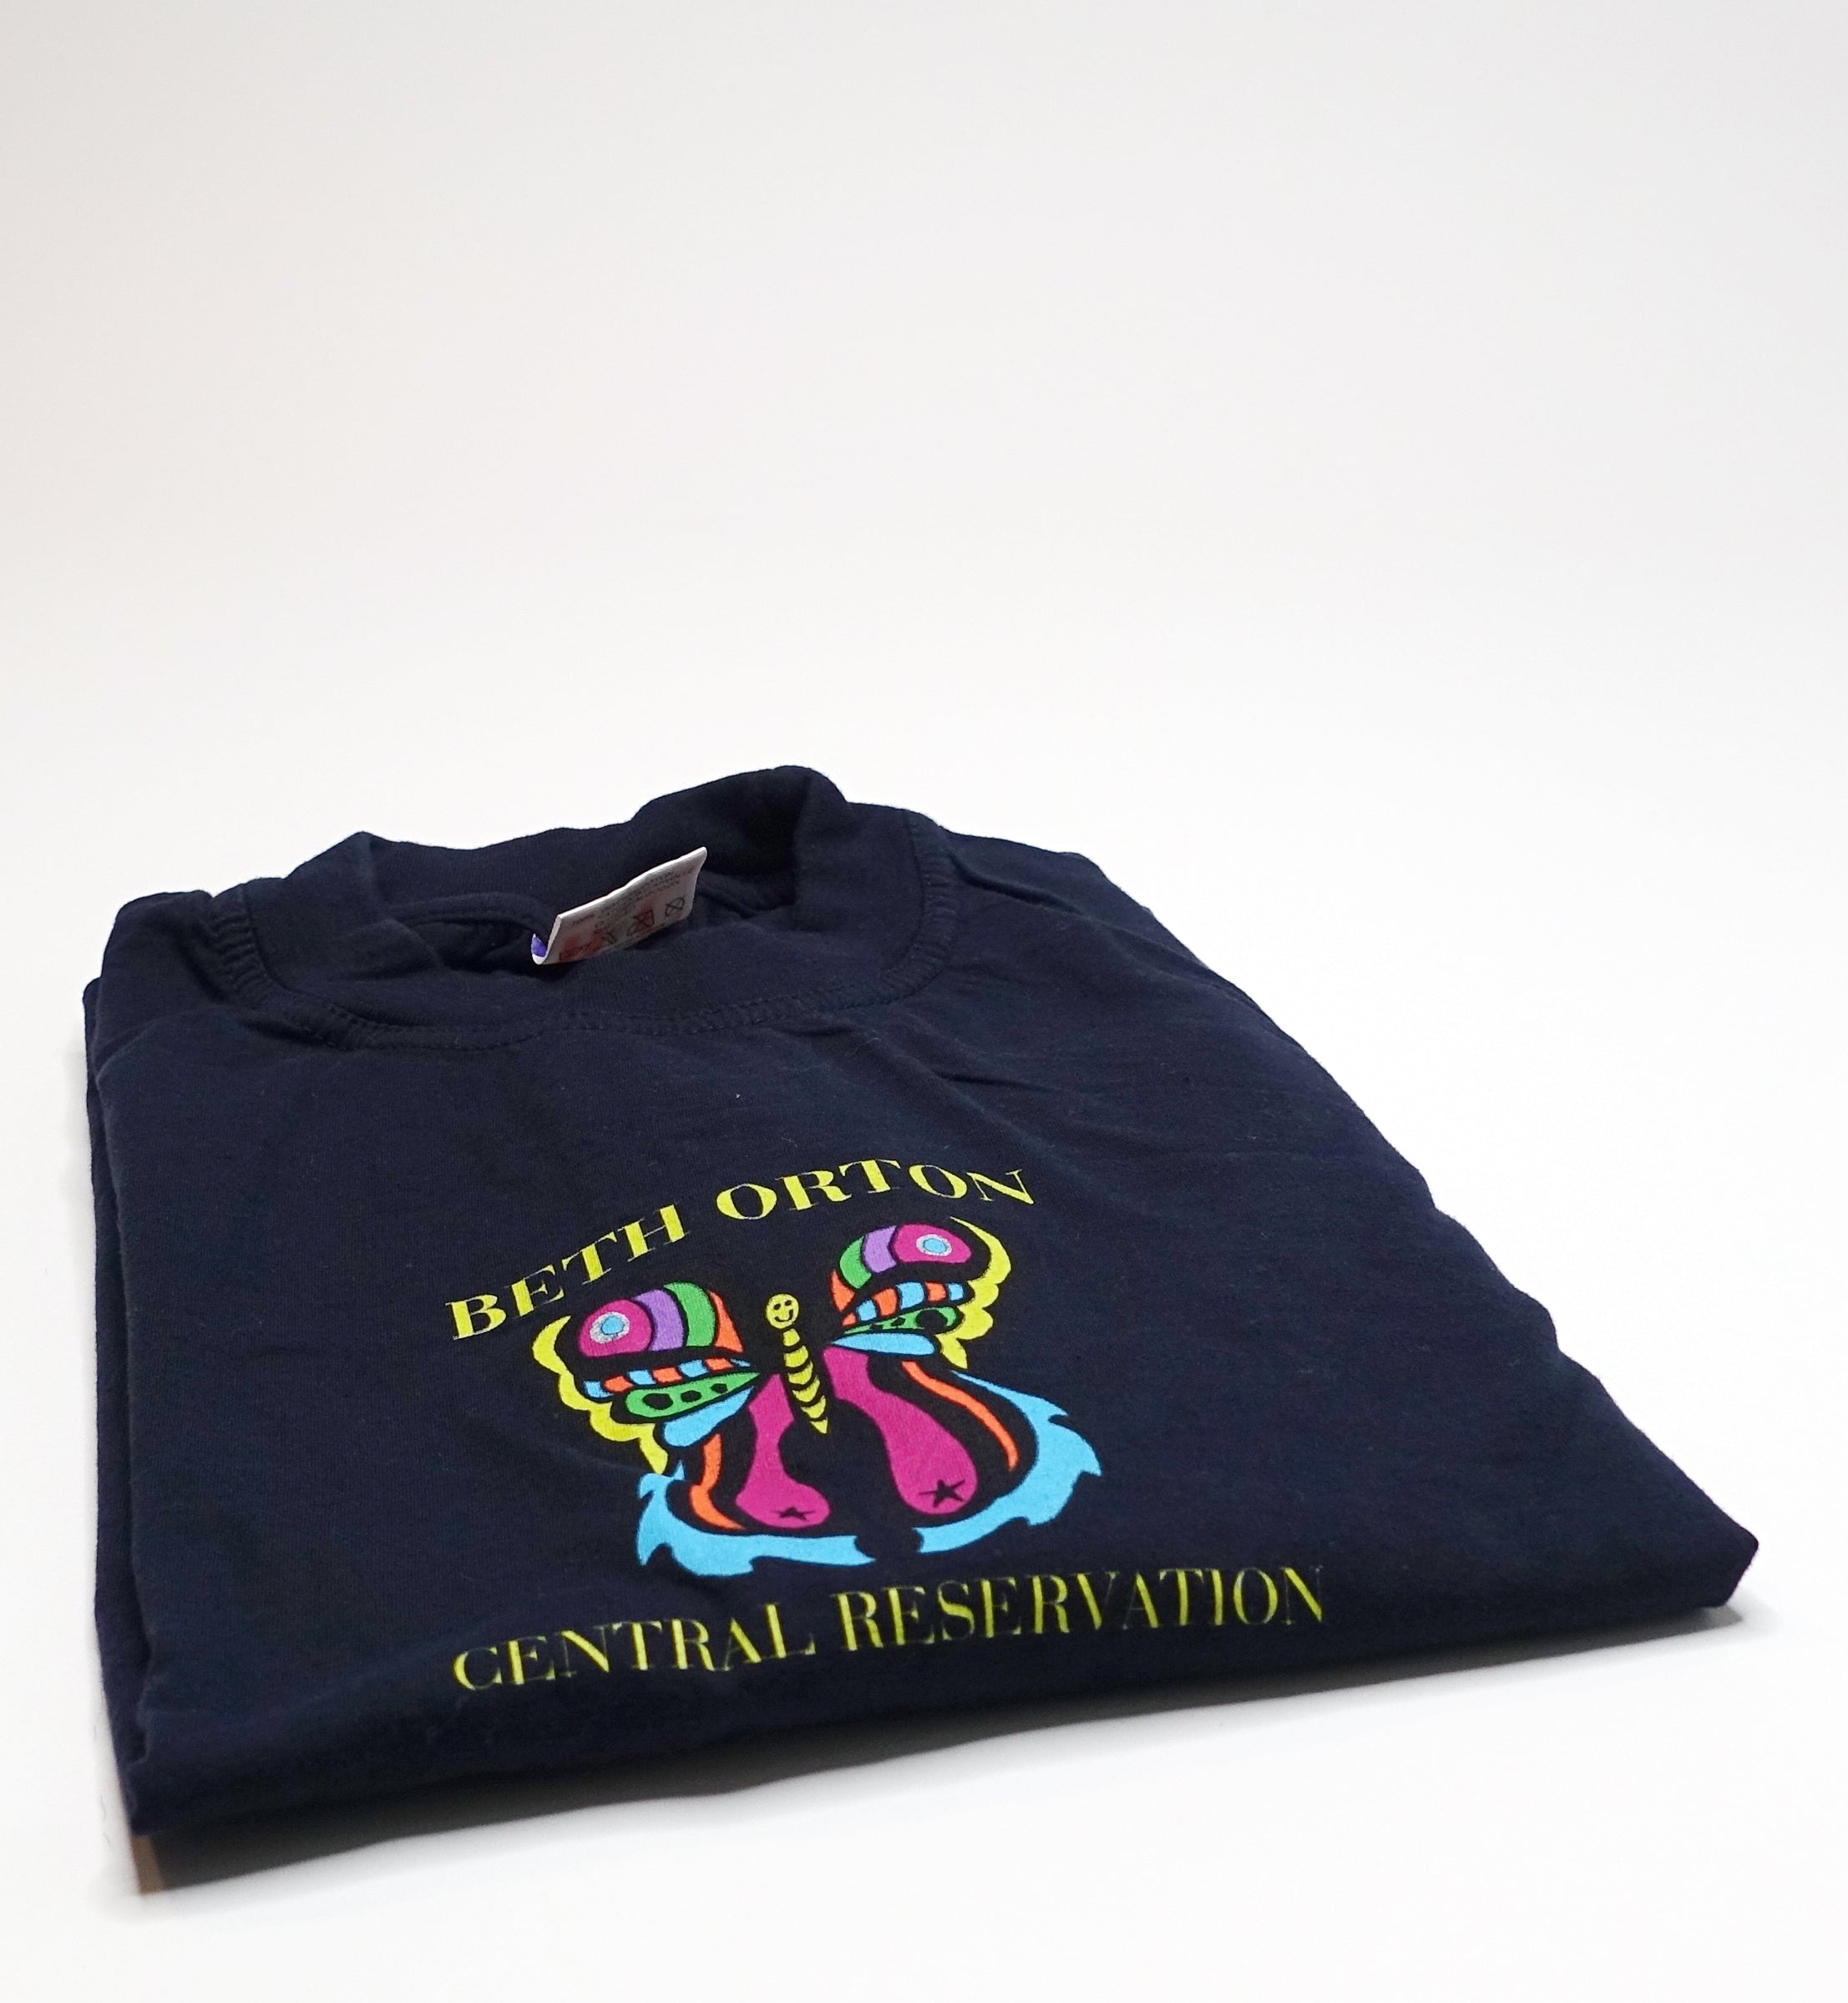 Beth Orton - Central Reservation Butterfly Logo 1998 Tour Shirt Size XL